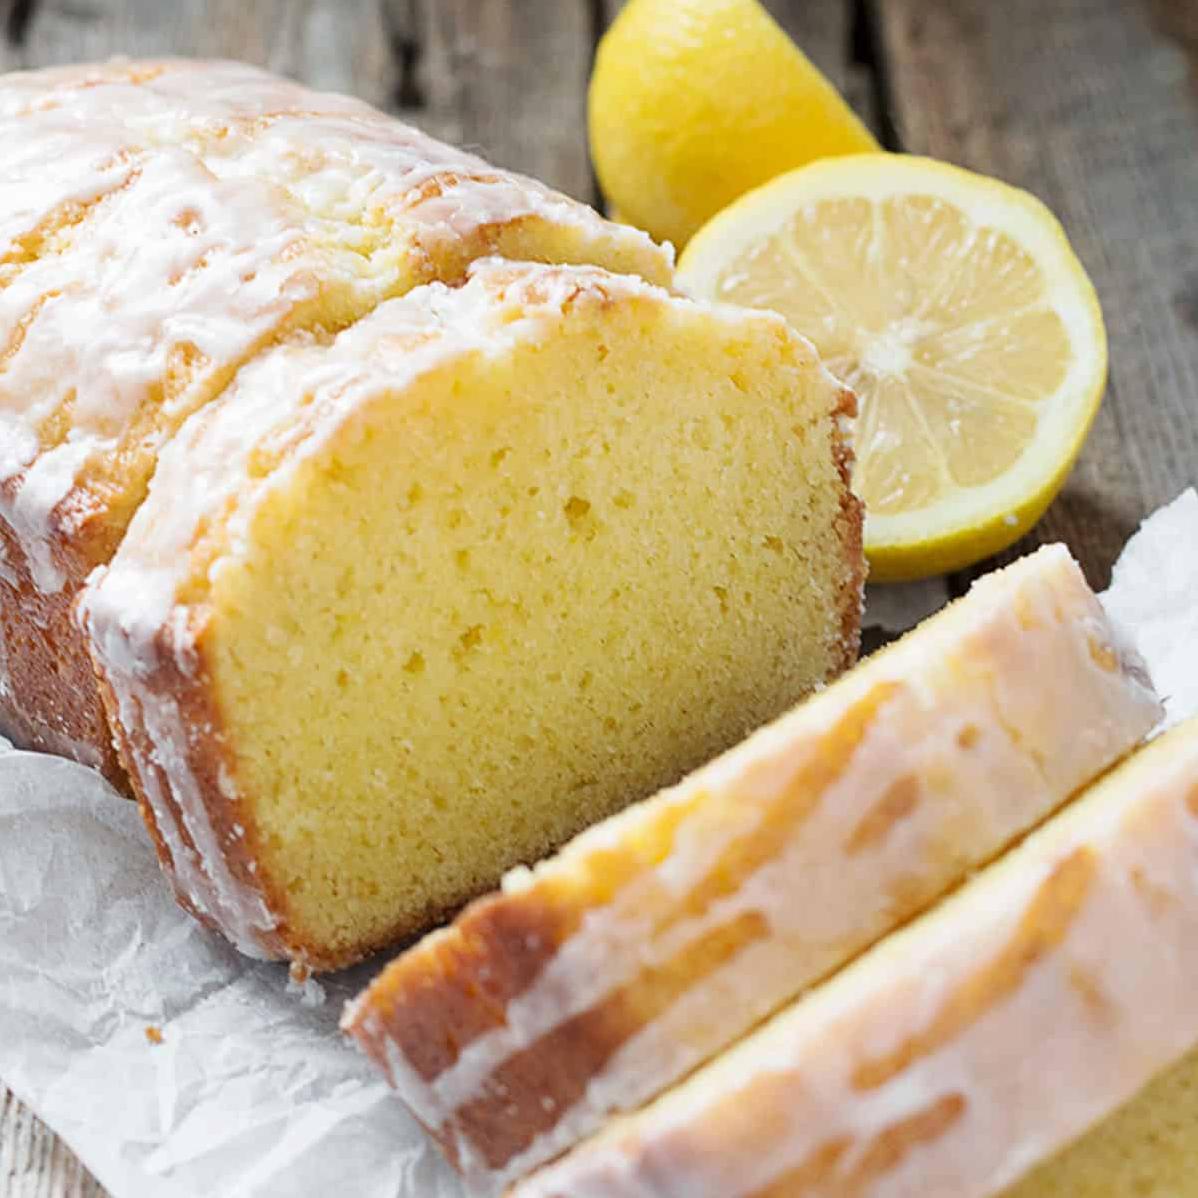  No need to wait until dessert to treat yourself! This Lemon Pound Cake makes for a delightful breakfast or mid-day snack.